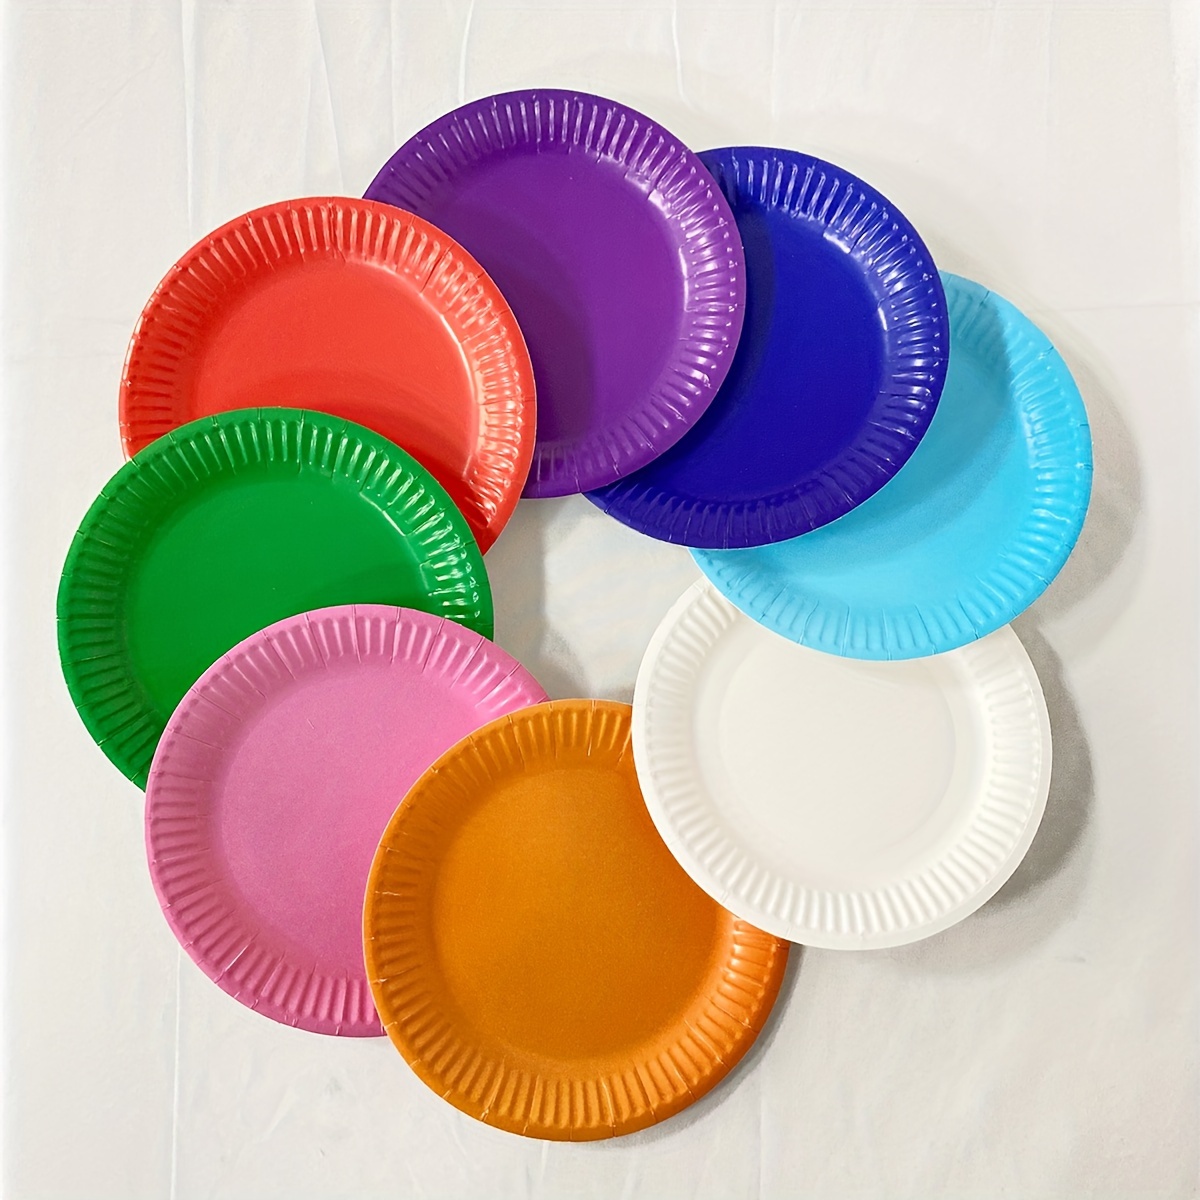  DIMEGON 100PCS Disposable Paper Plate Color Paper Plate 7Inch  Round DIY Disposable Colorful Plate Paper Dish for Dessert Plates Birthday  Party Supplies : Health & Household